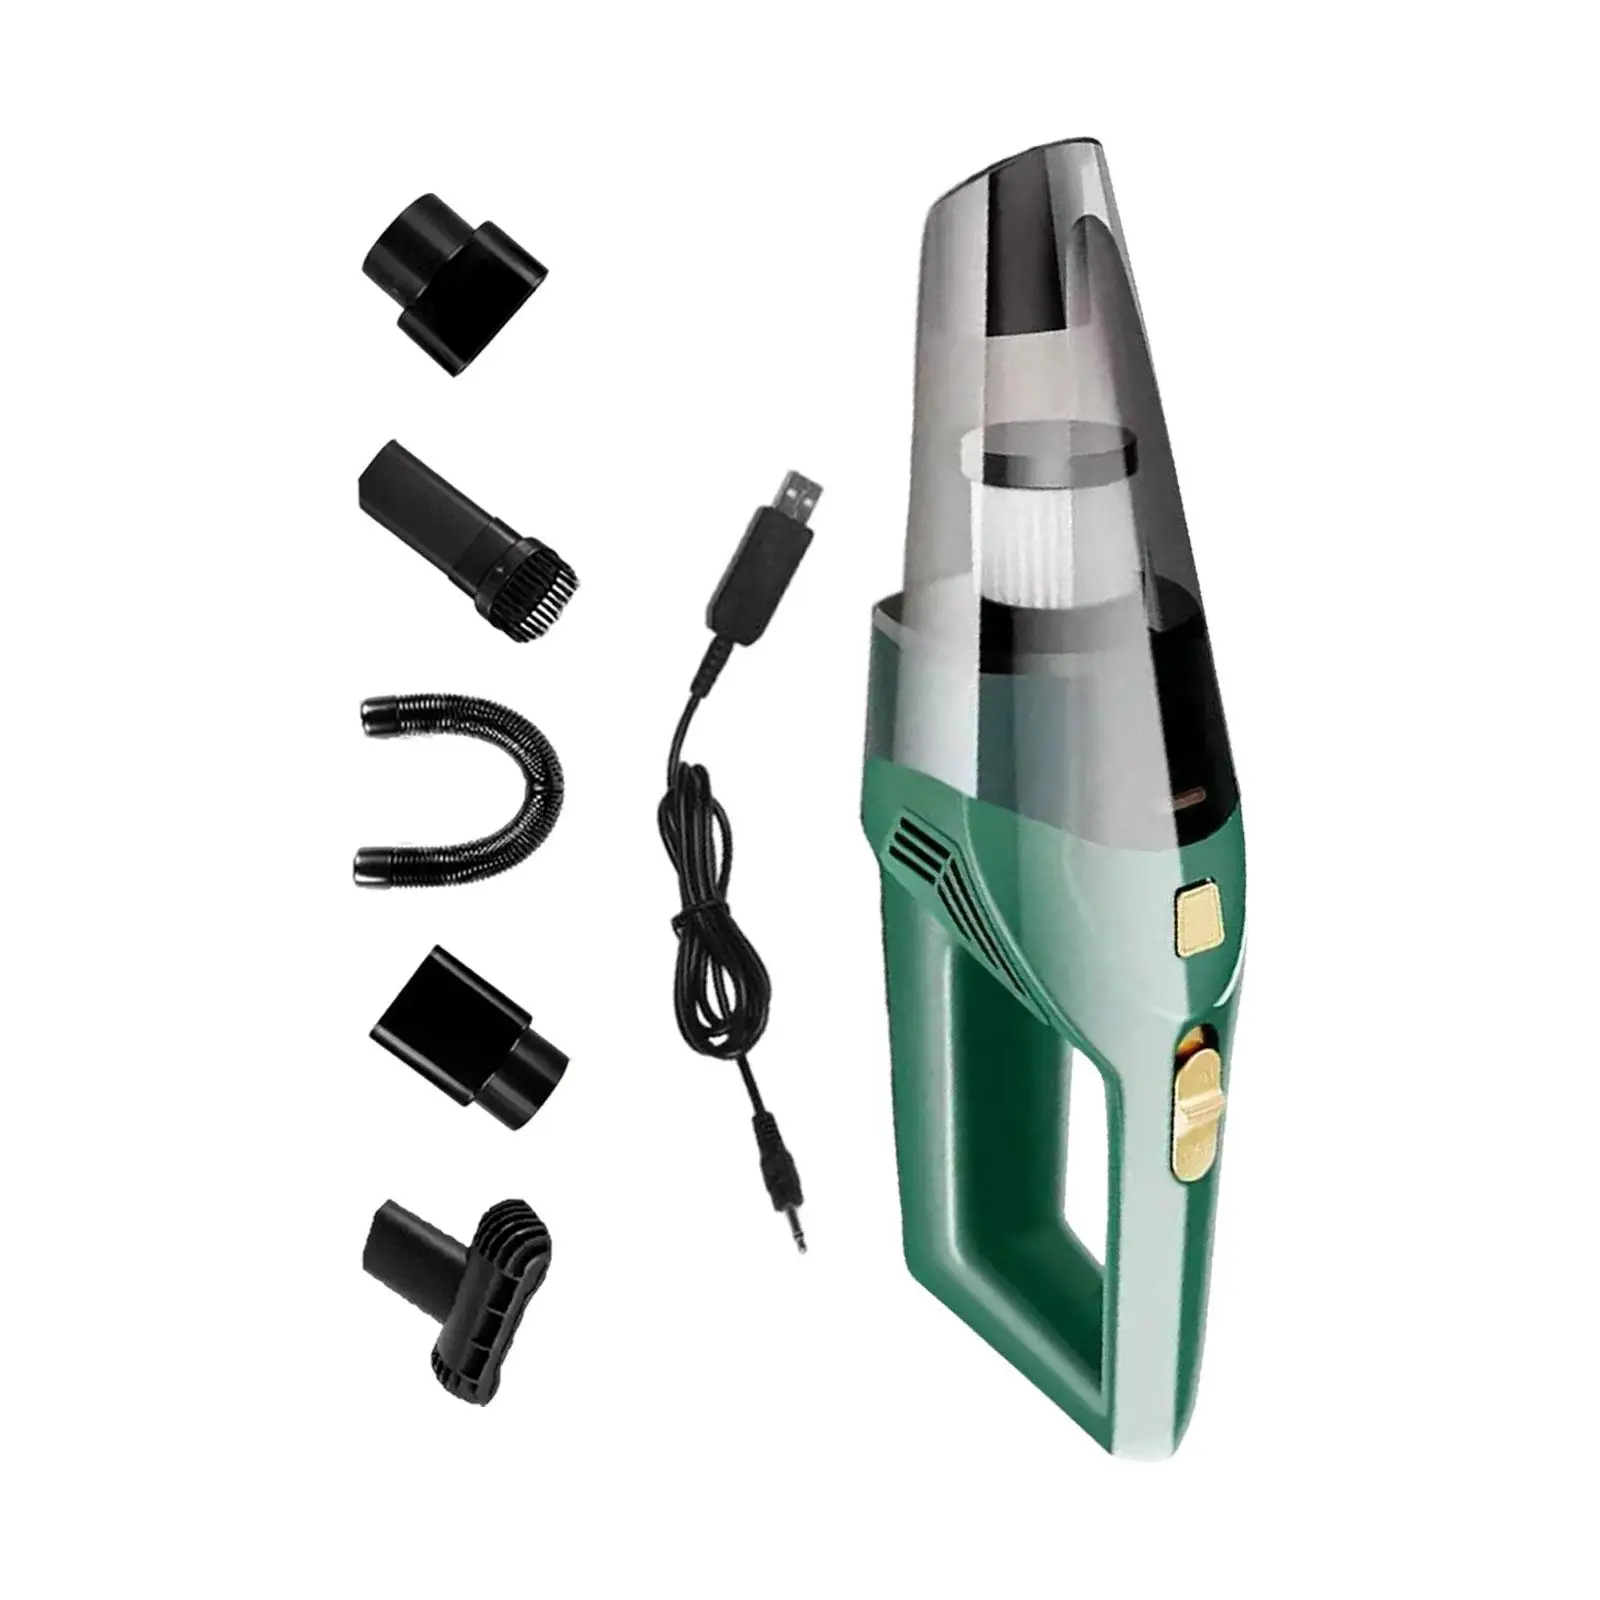 Portable Car Vacuum Cleaner Powerful High Power for Bedroom Pet Hair